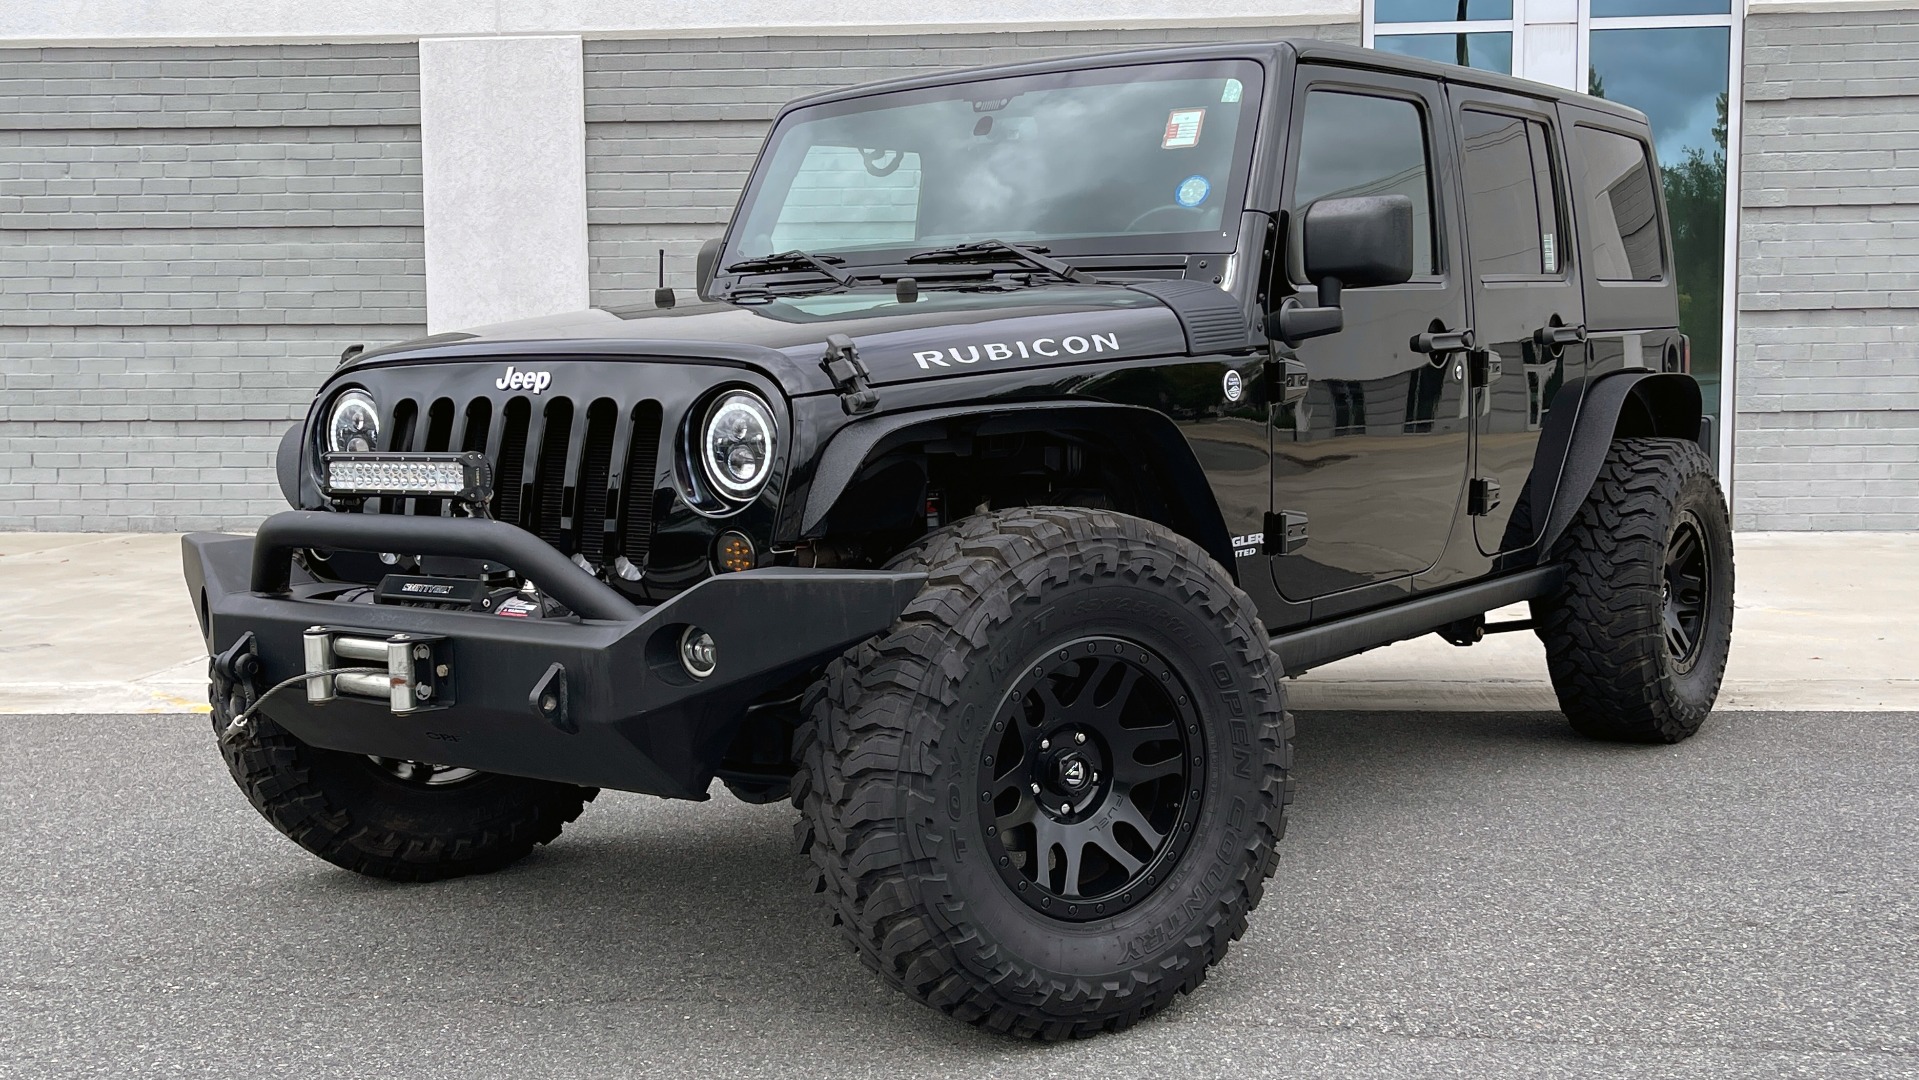 Used 2013 Jeep WRANGLER UNLIMITED RUBICON 4X4 / 3.6L V6 / 6-SPD MAN / DUAL-TOP / AIR COND for sale Sold at Formula Imports in Charlotte NC 28227 2